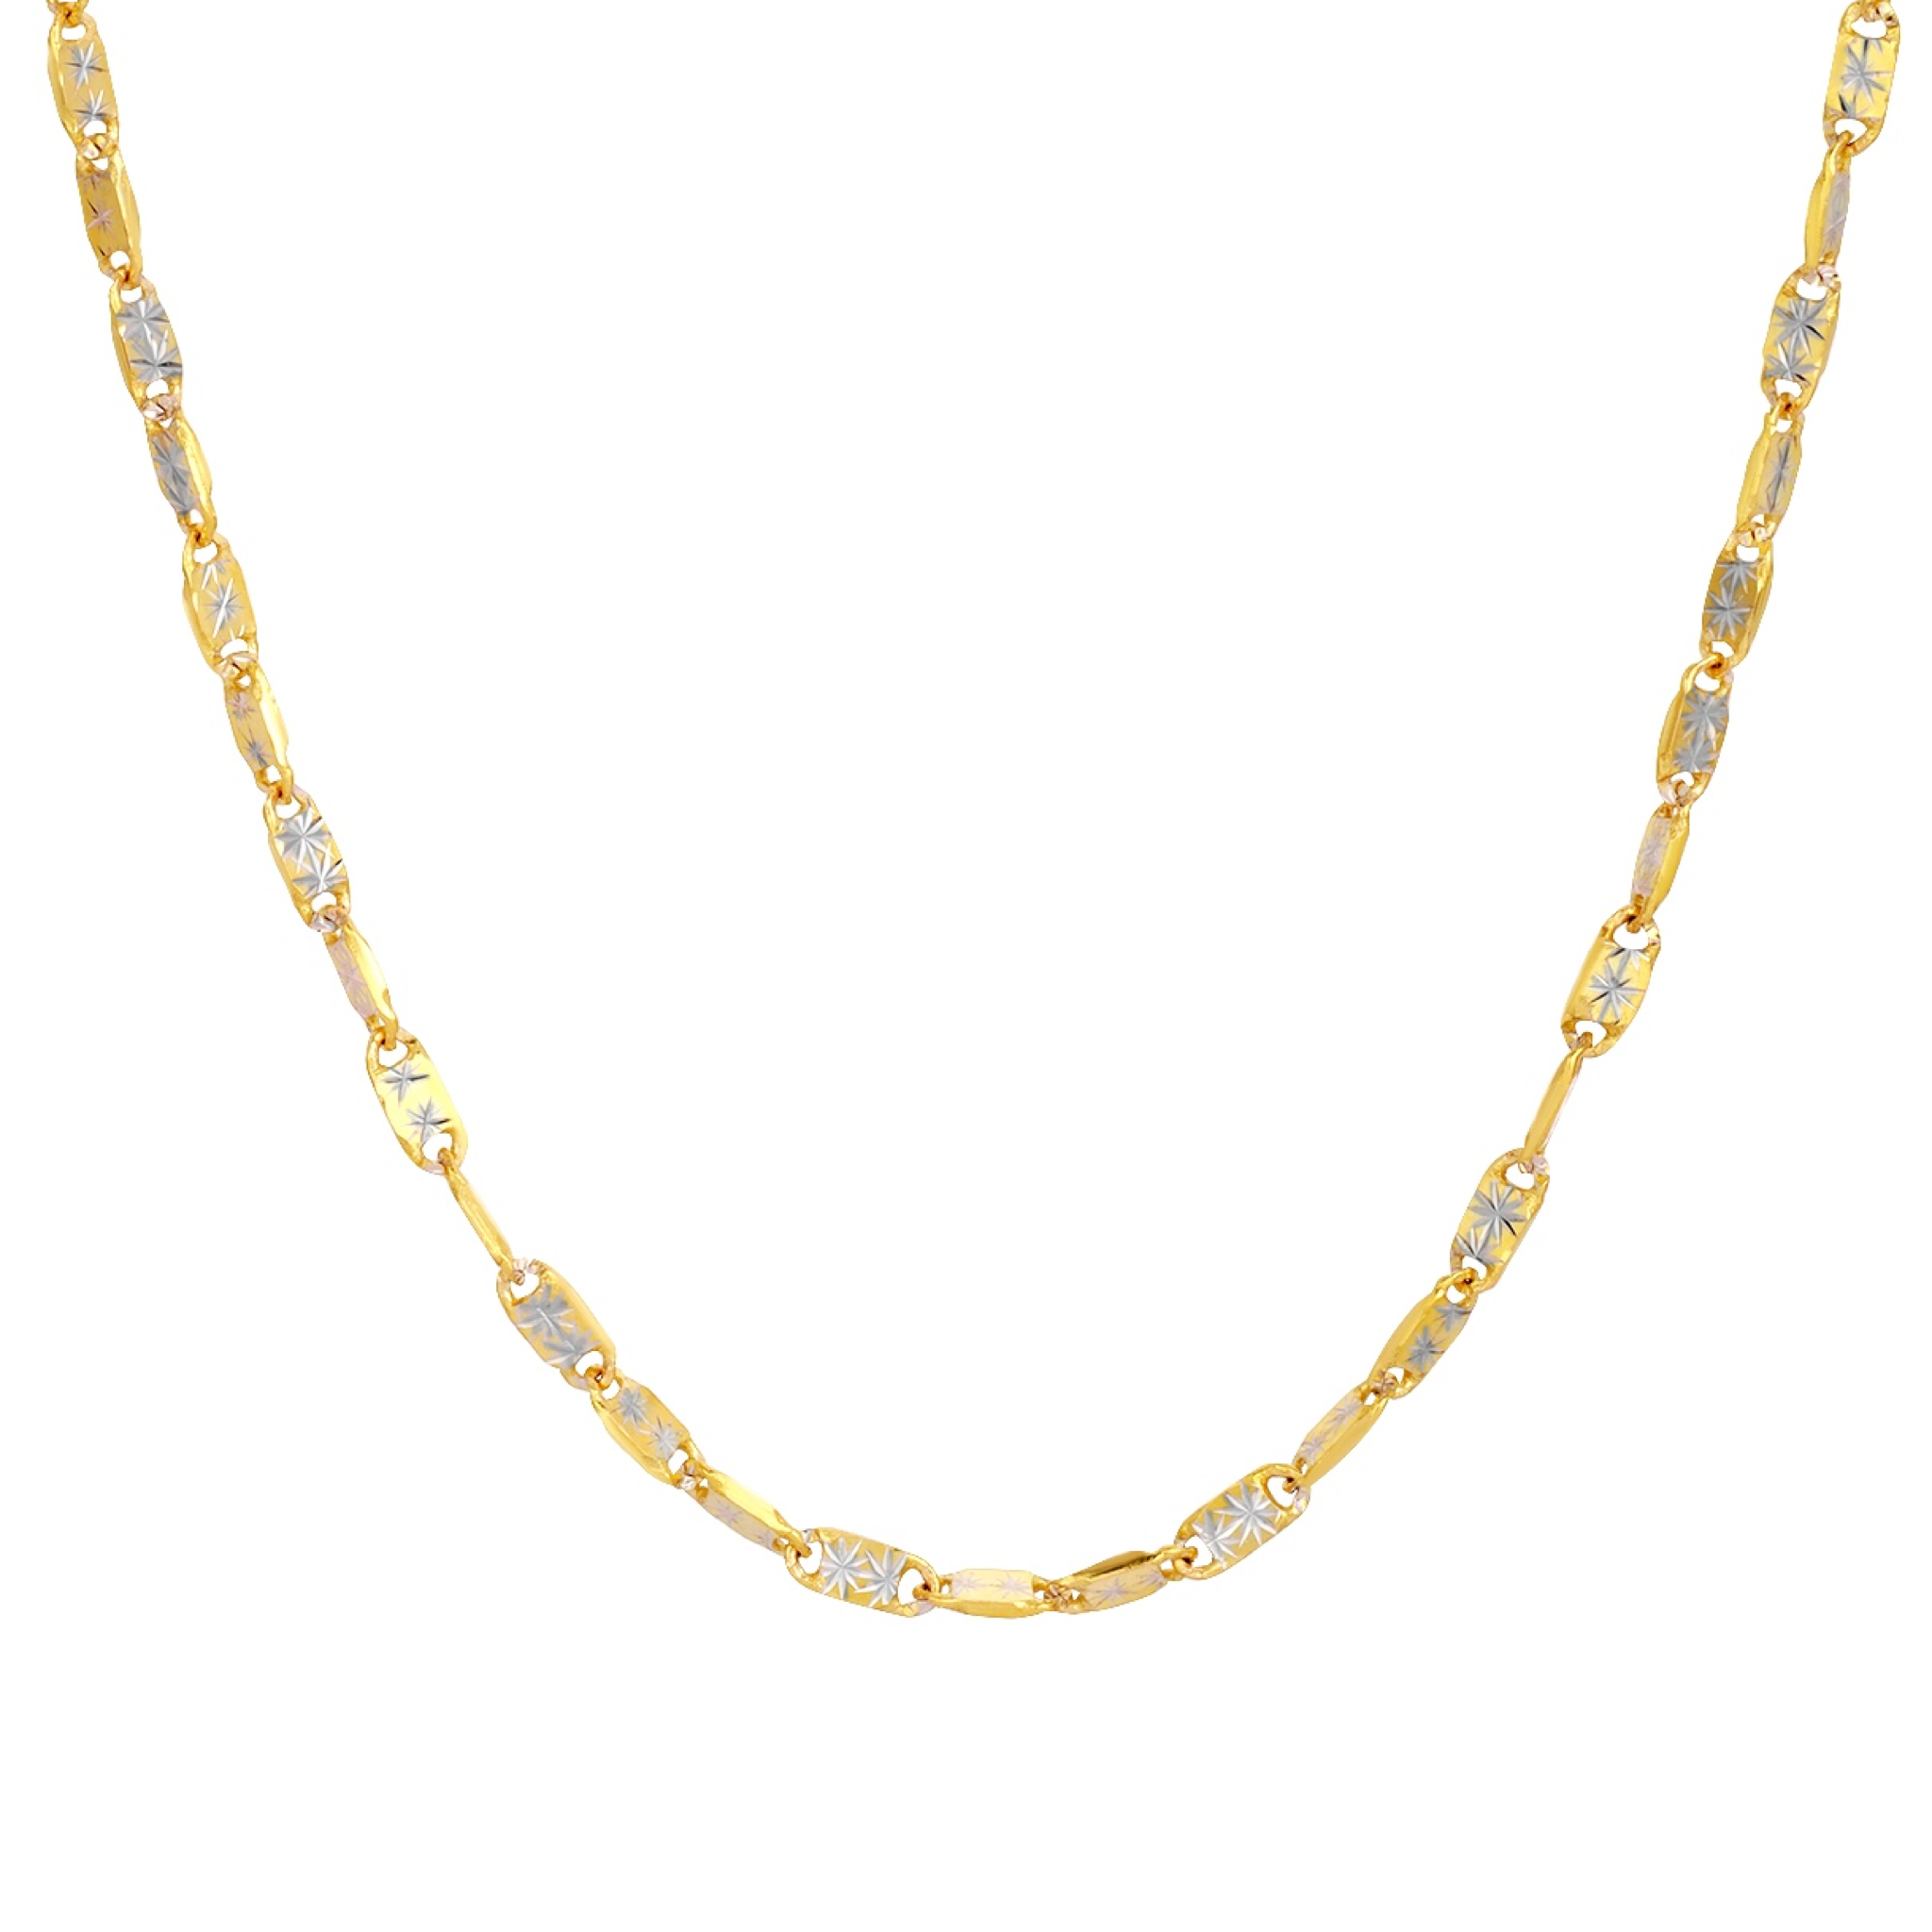 14K TWO TONED GOLD STARBURST CHAIN -1.5MM